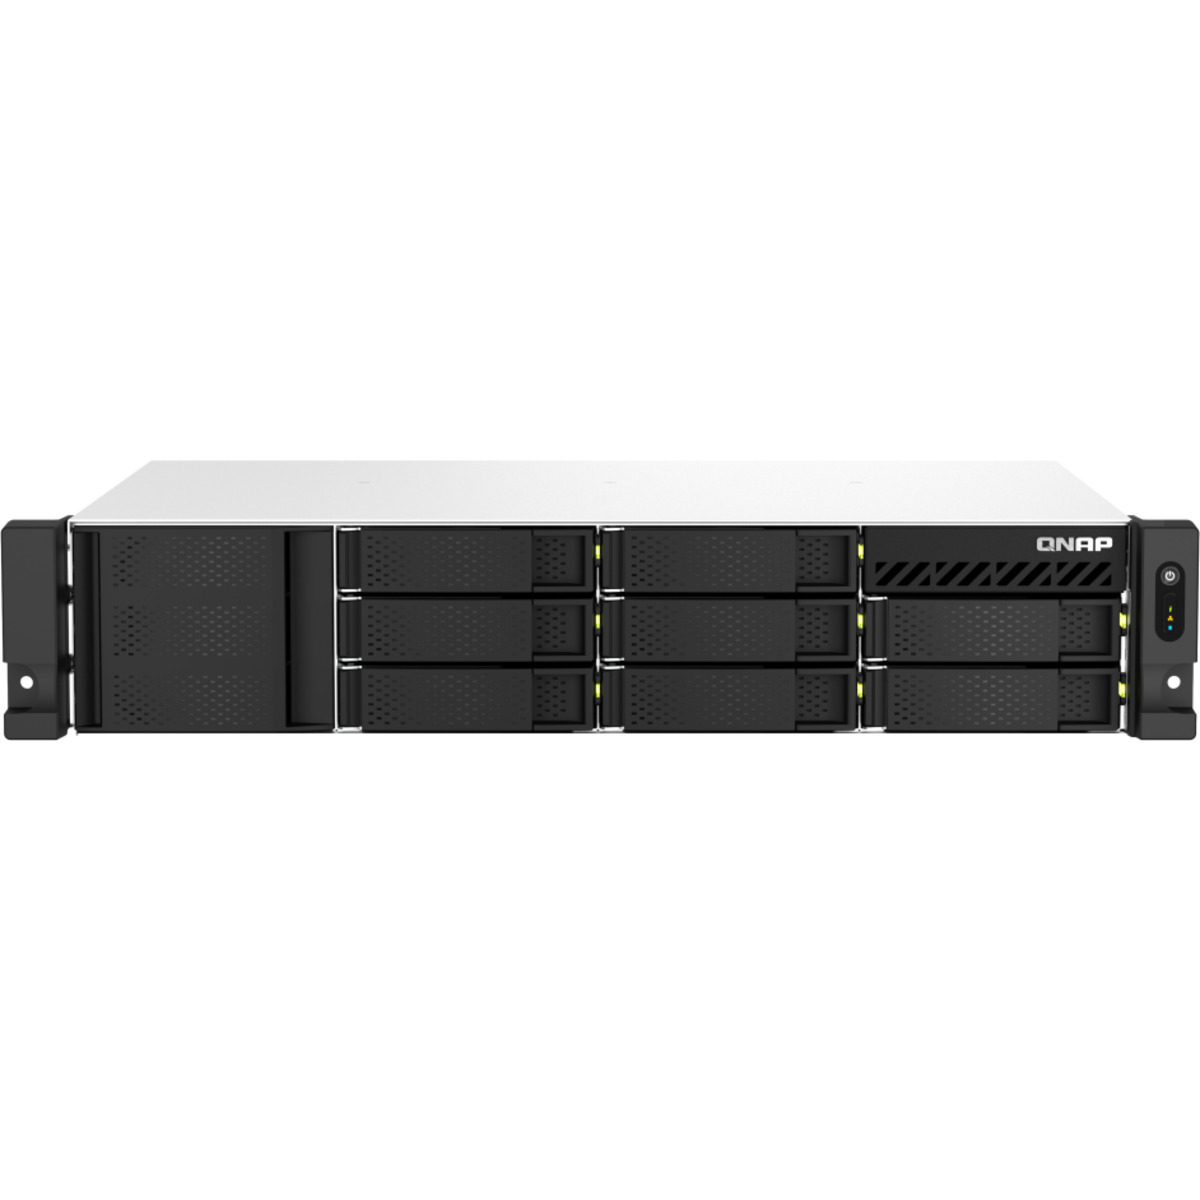 QNAP TS-873AeU-RP RackMount 8-Bay Multimedia / Power User / Business NAS - Network Attached Storage Device Burn-In Tested Configurations - FREE RAM UPGRADE TS-873AeU-RP